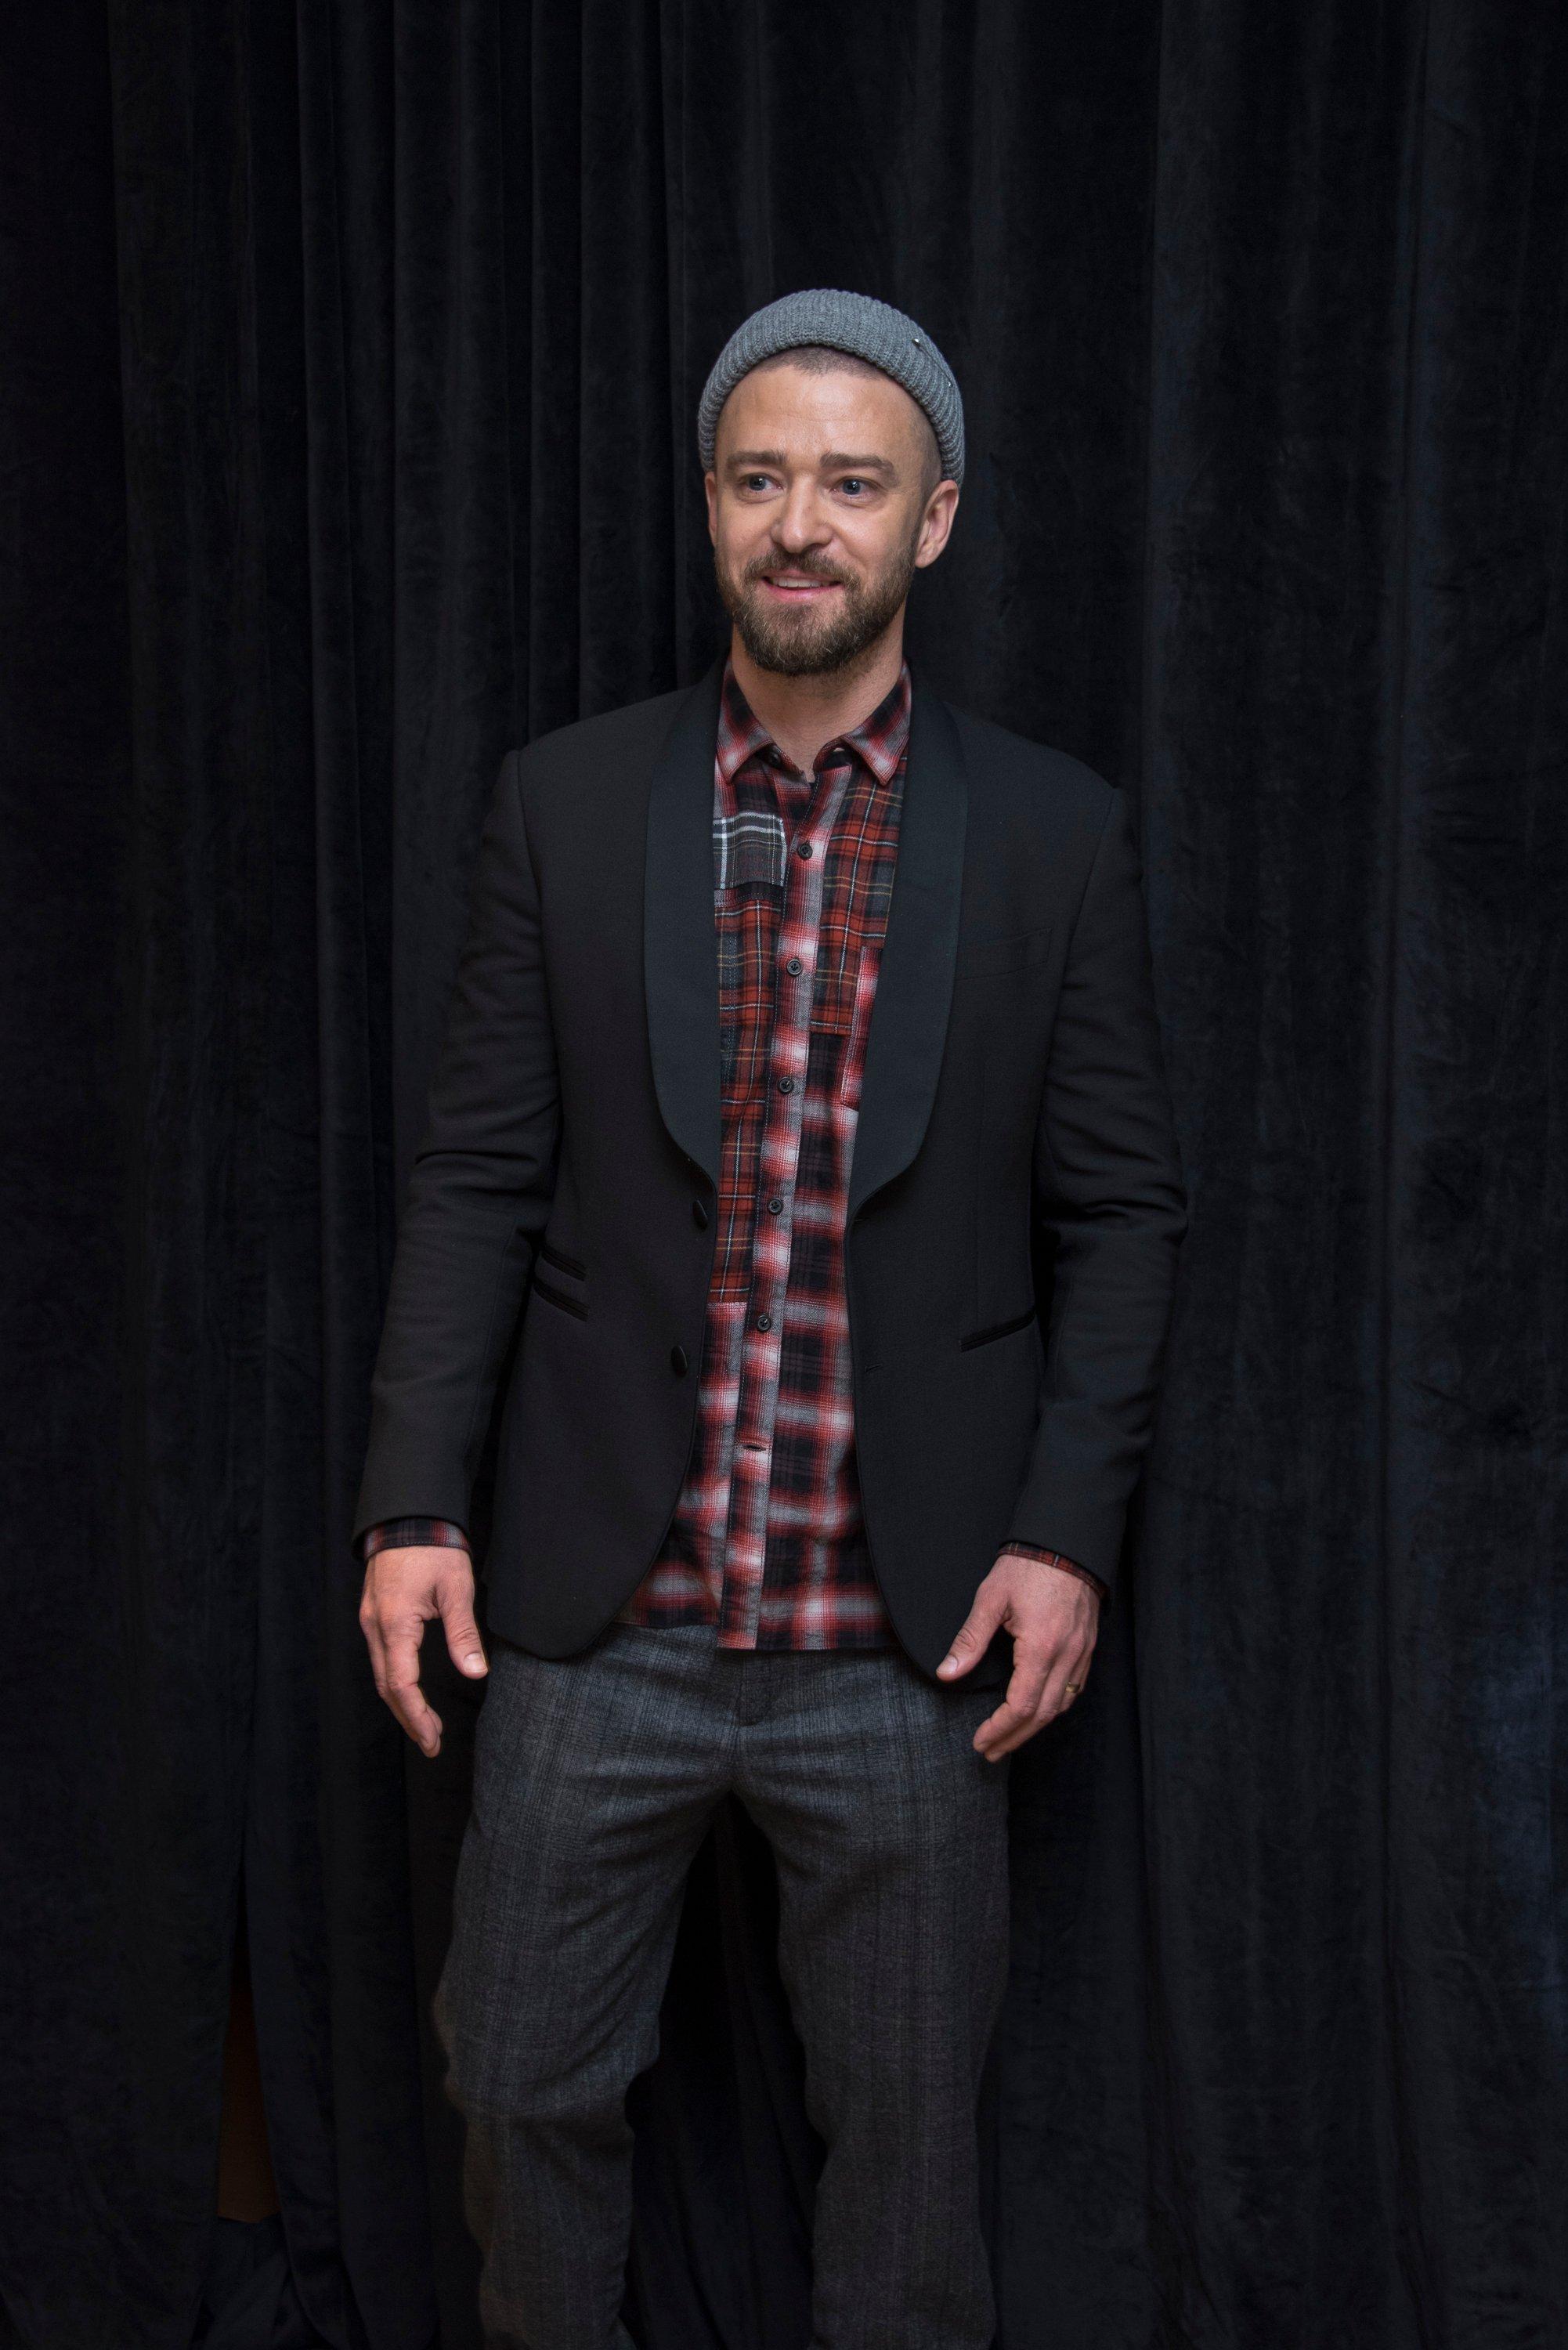 Justin Timberlake photographed in 2017